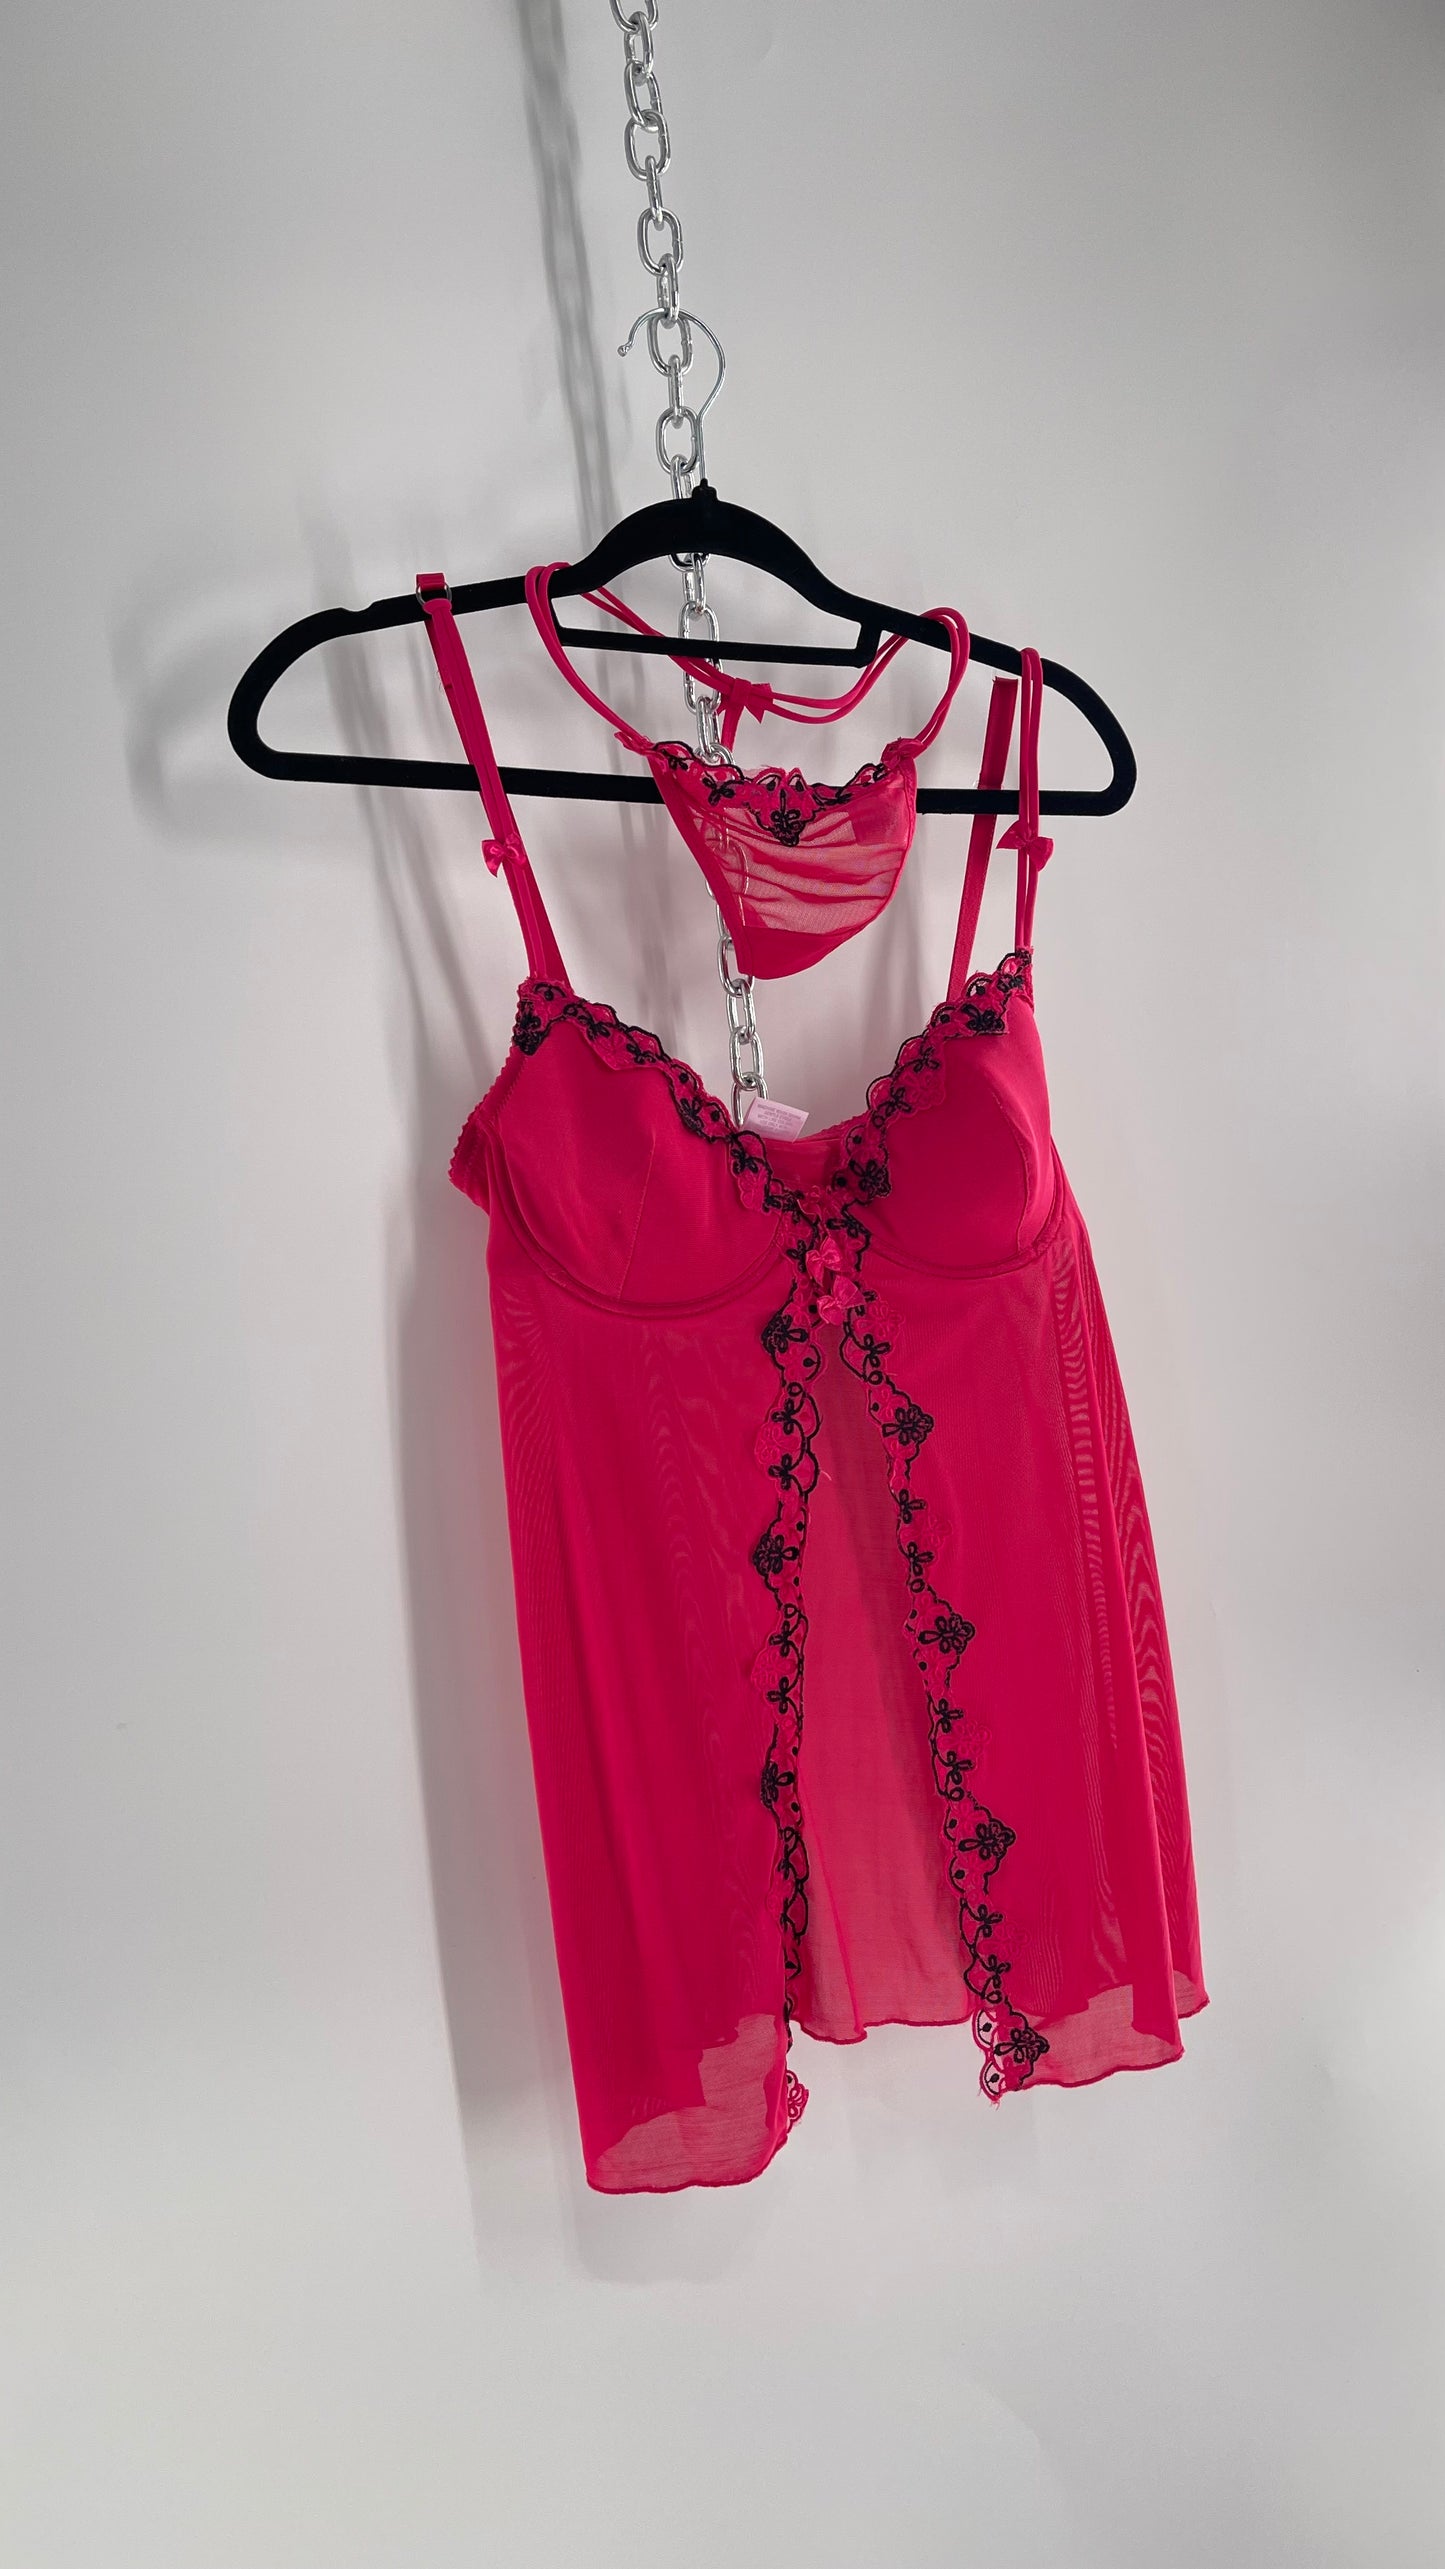 Vintage HOT Hot Pink Vented Babydoll Top and Thong Set with Black Embroidery and Bows (Medium)